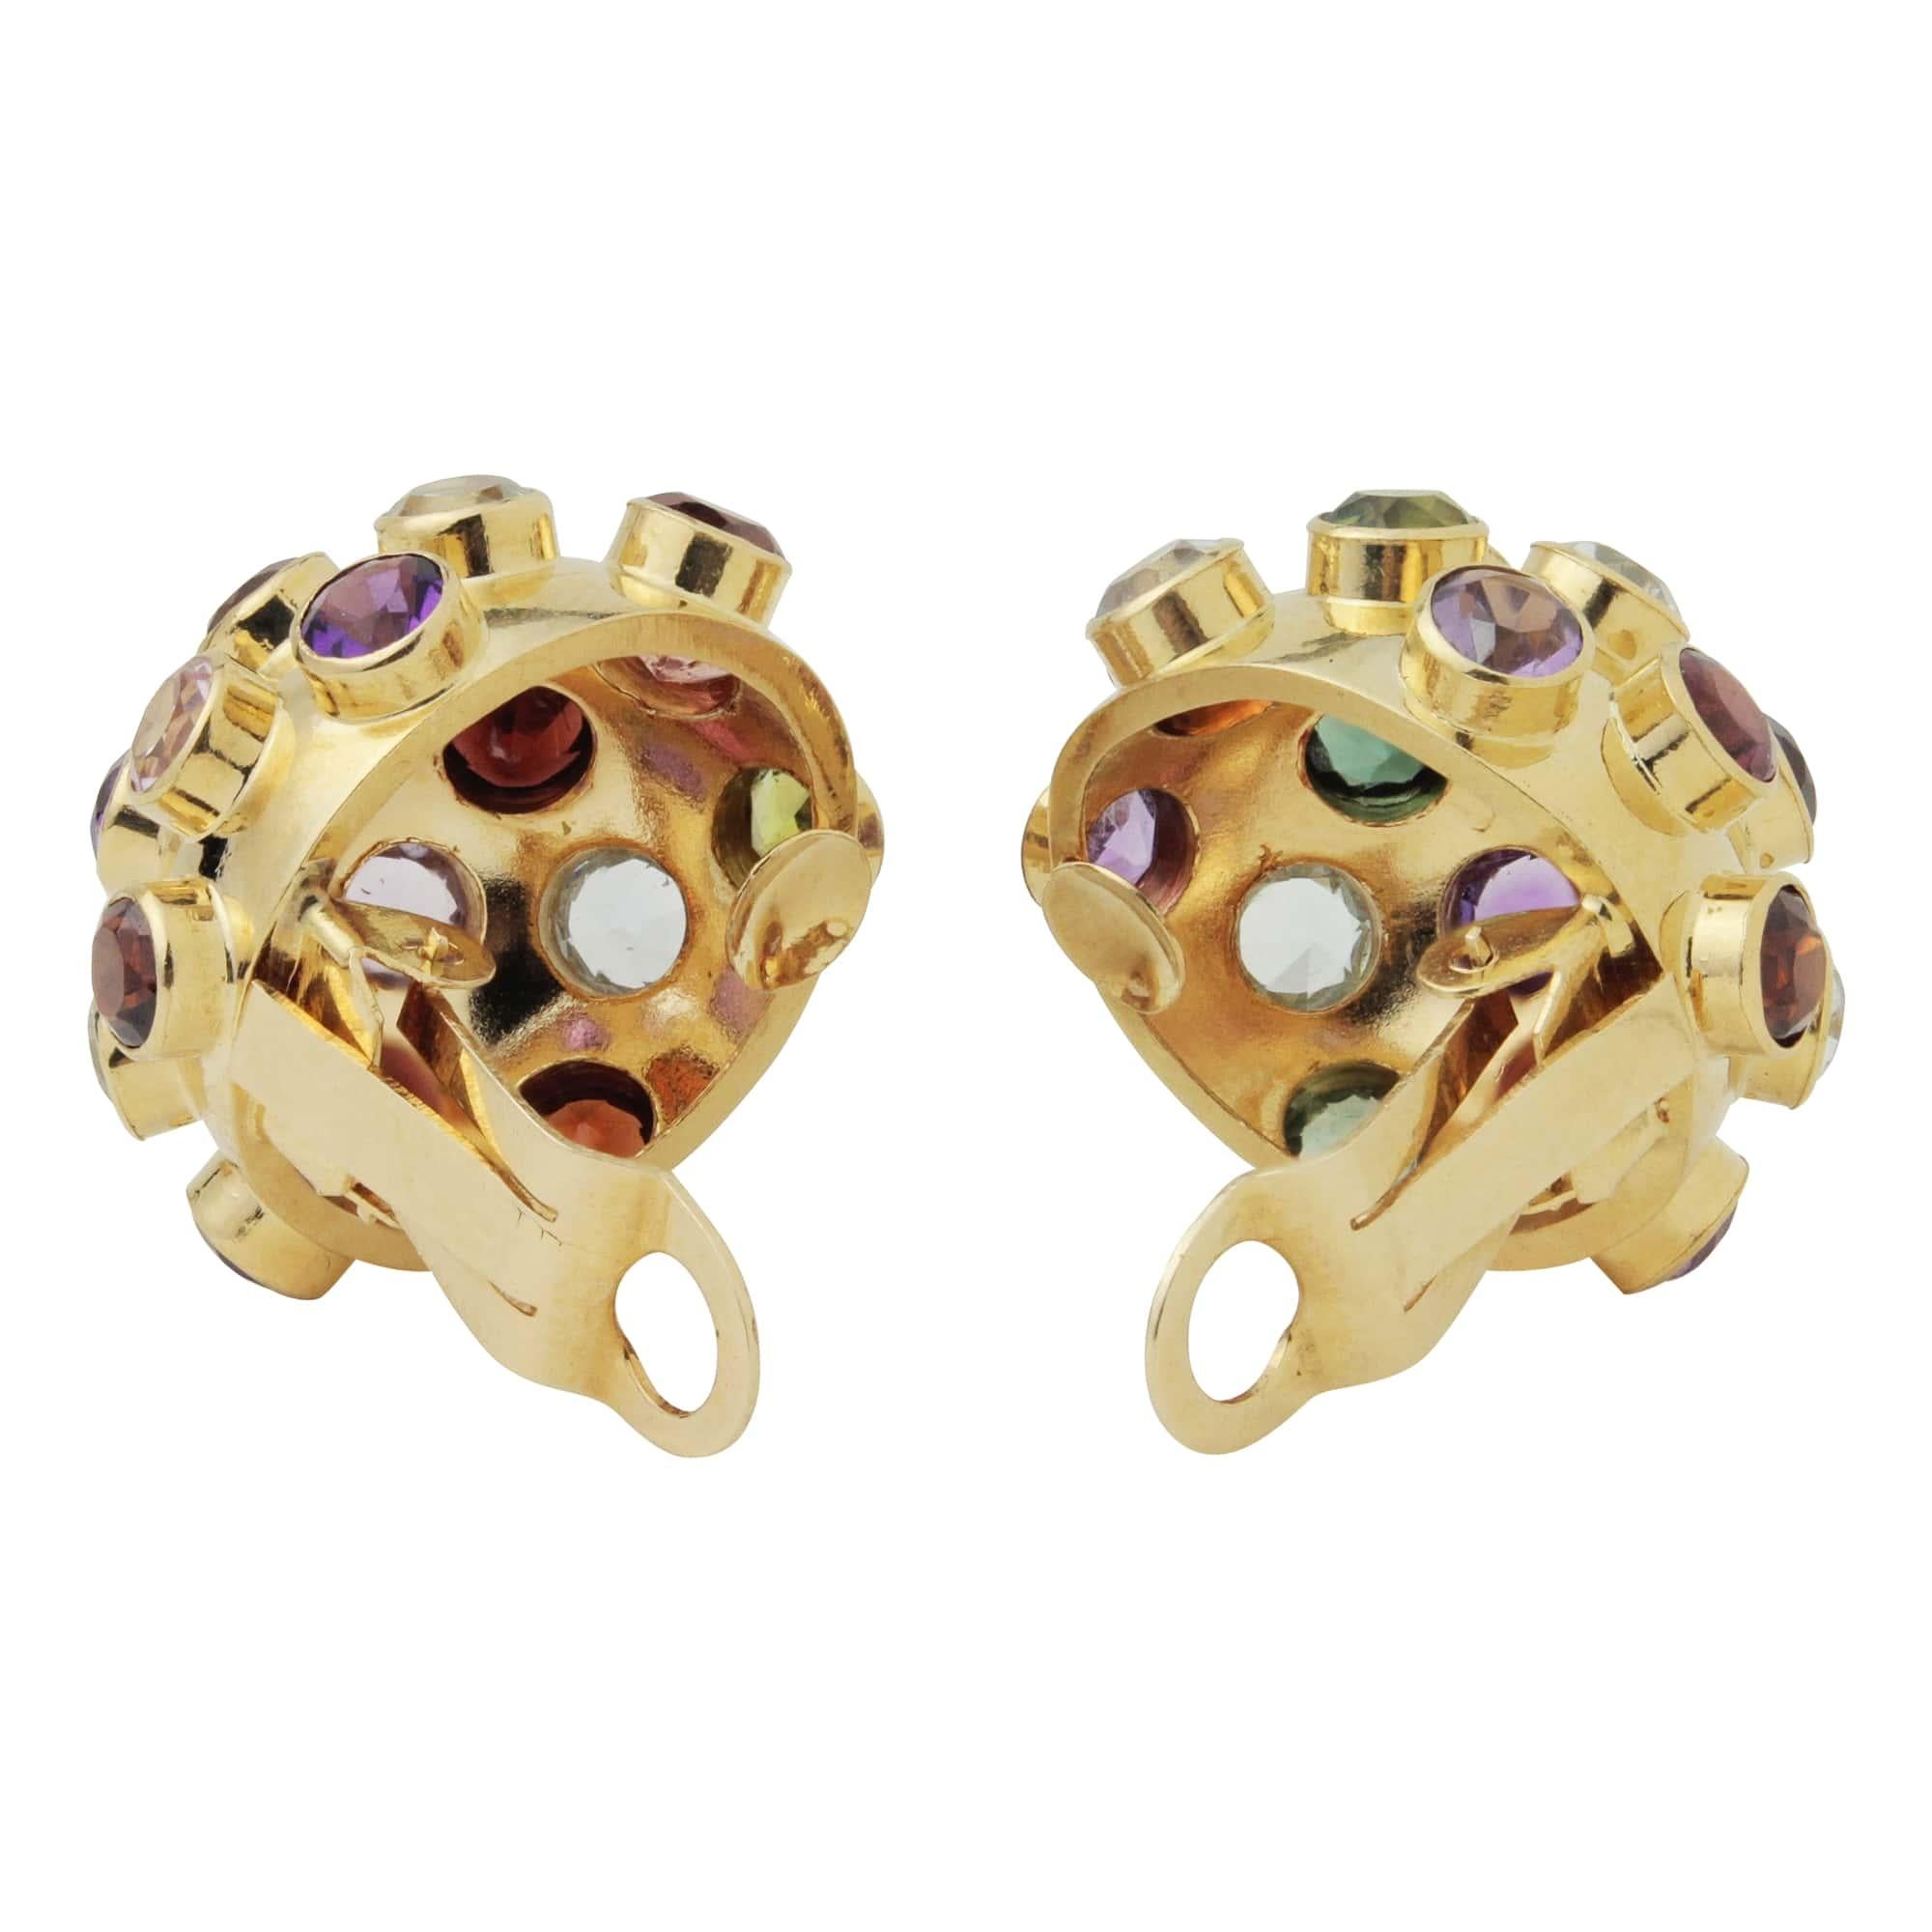 Who doesn't love H Stern jewellery? This Brazilian jewellery designer has such iconic styles - recognizable and so collectible. This fabulous pair of Sputnik clip on earrings features a multitude of natural gemstones - aquamarine, garnets,